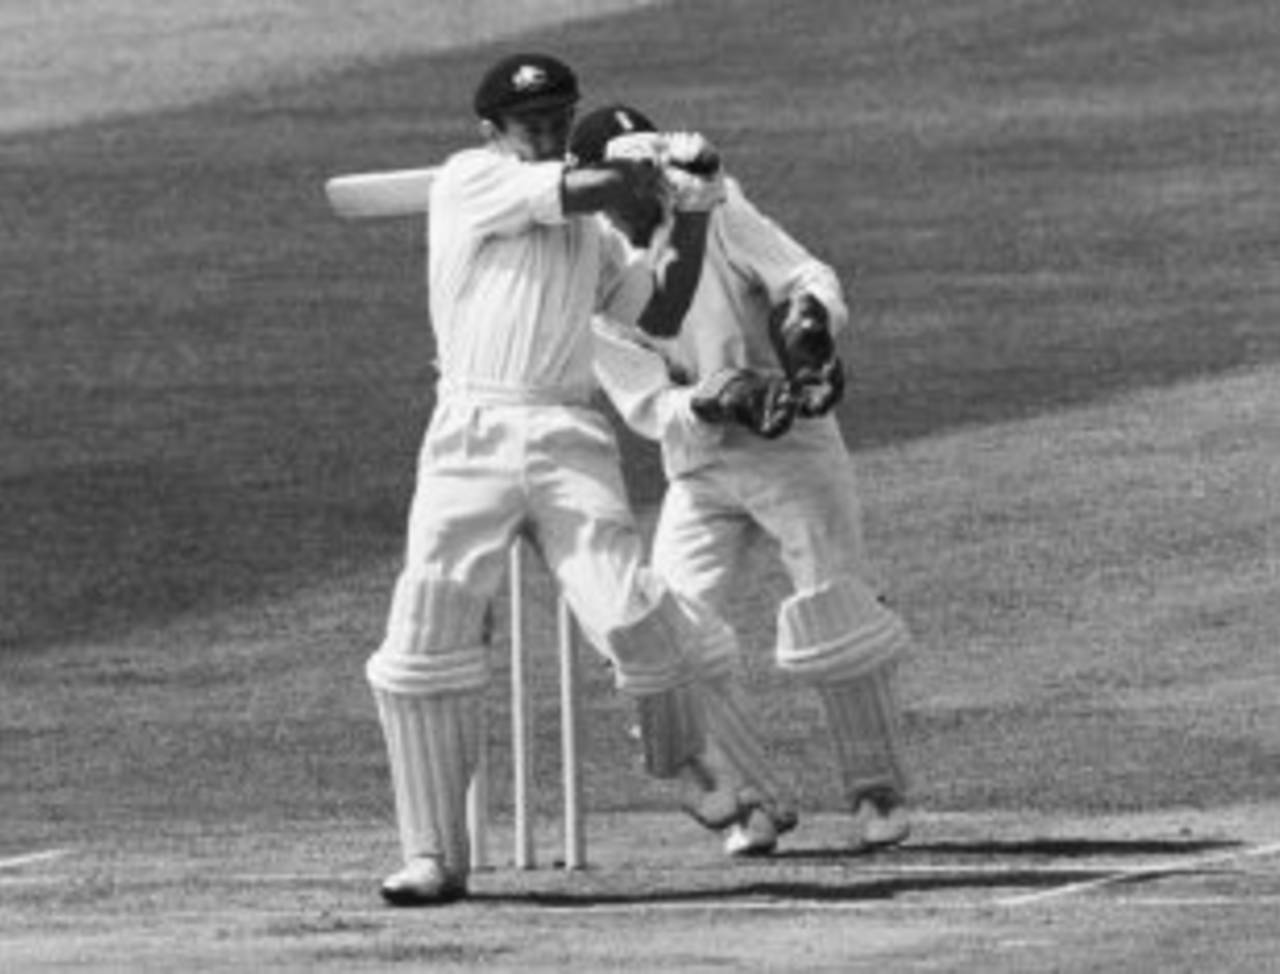 Doug Walters pulls during his innings of 86, England v Australia, 1st Test, Manchester, 4th day, June 10, 1968